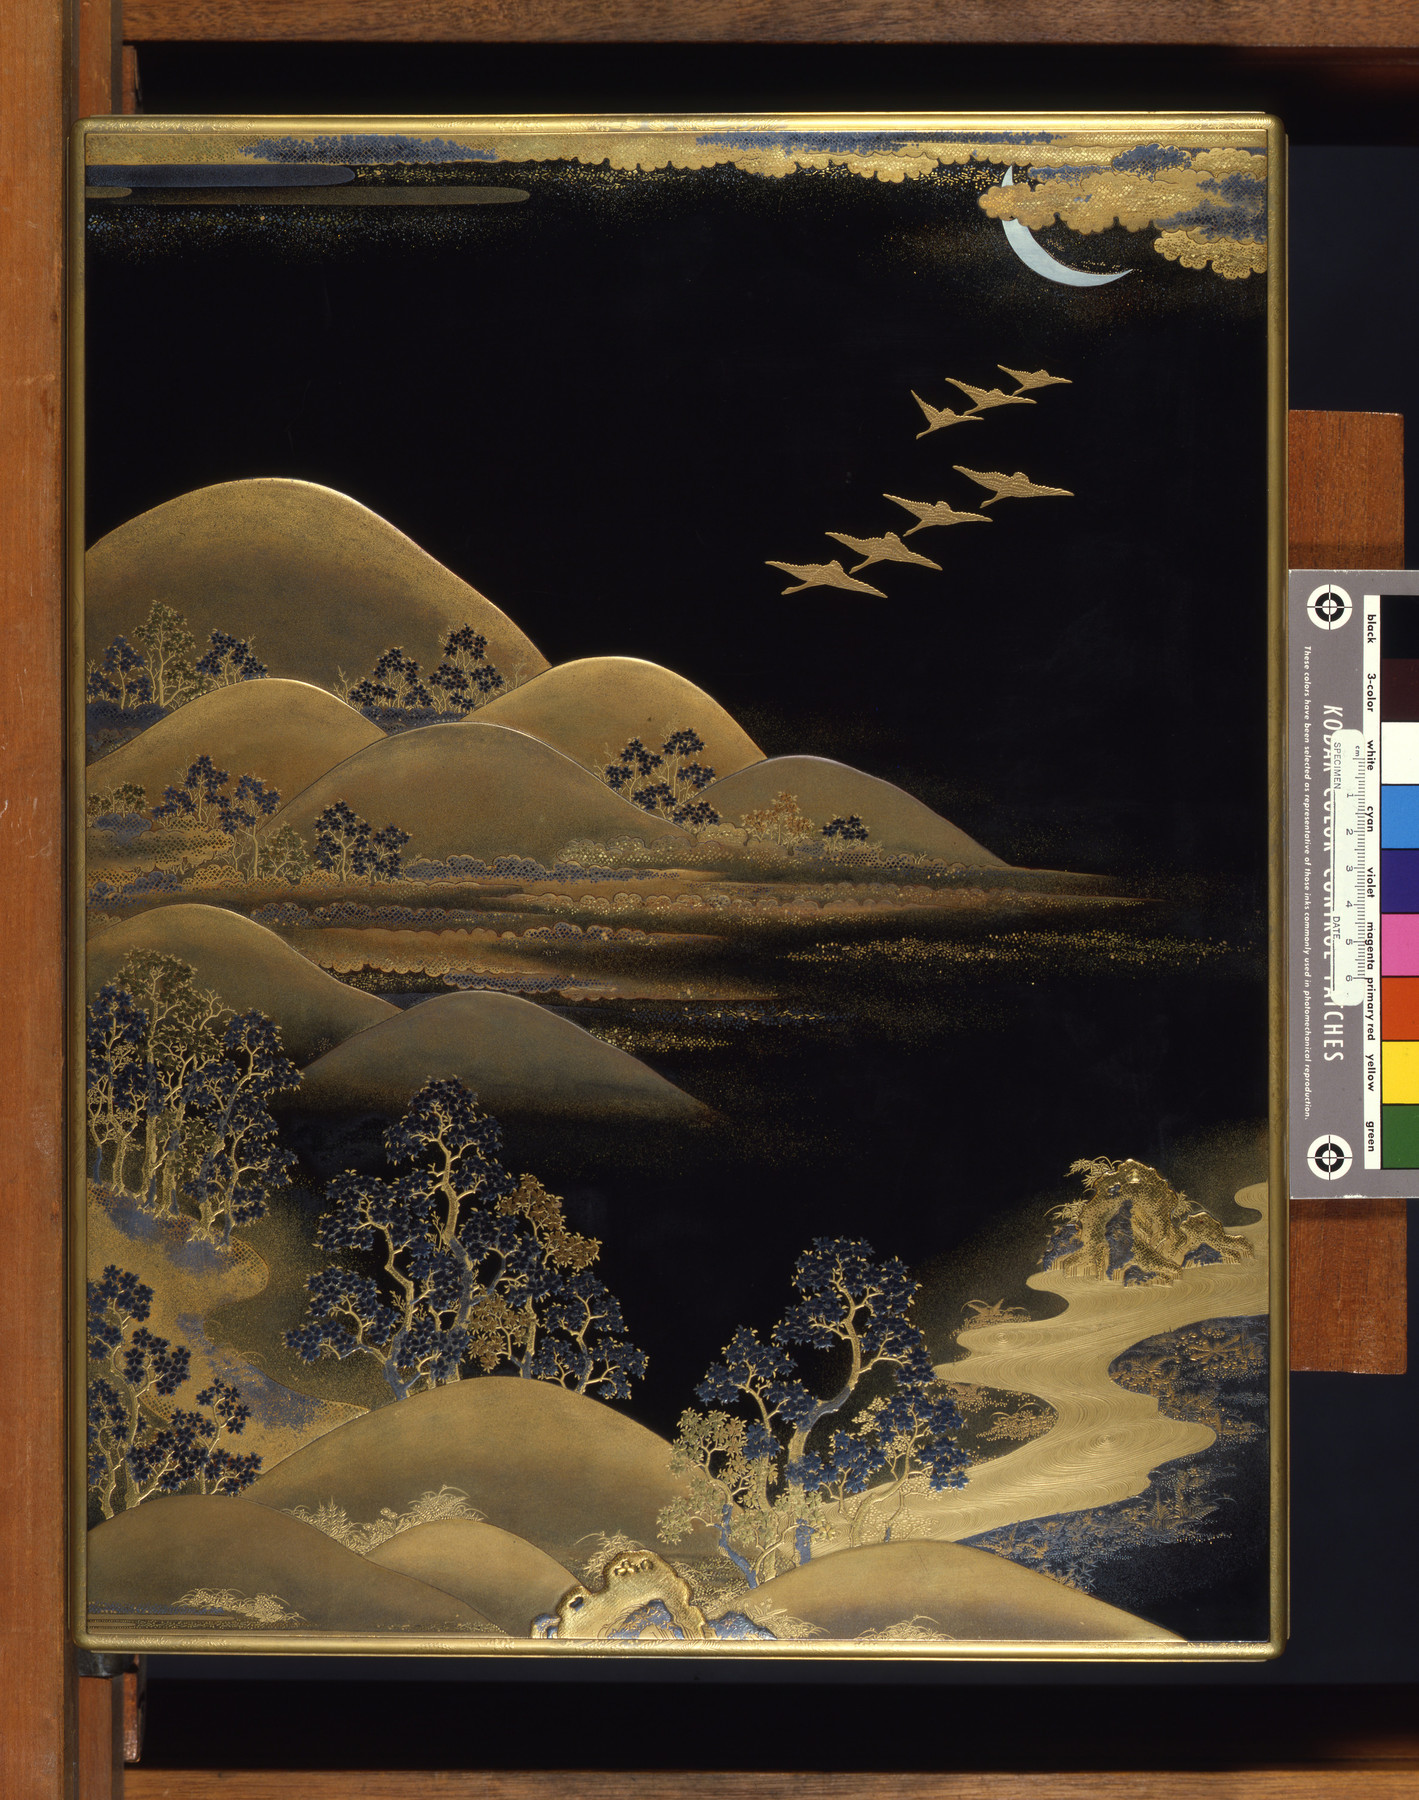 Image for Box for documents/ ryoshi-bako; Seven flying wild geese in landscape